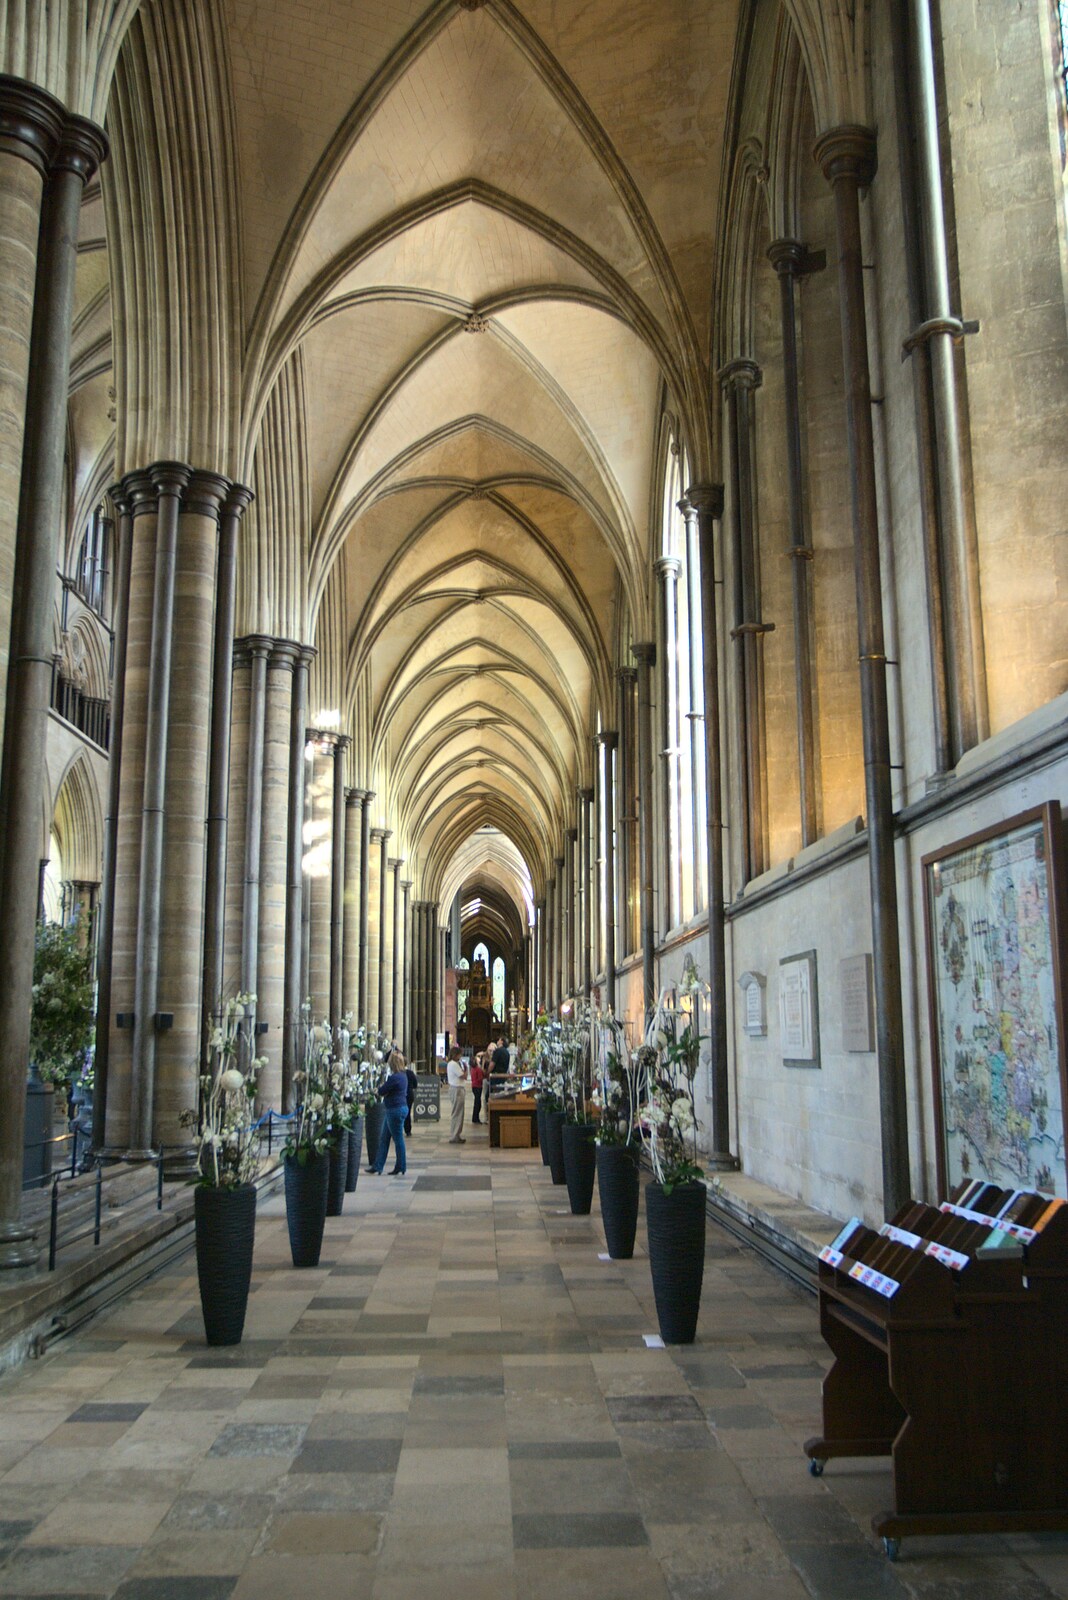 Inside Salisbury Cathedral from A Camper Van Odyssey: Oxford, Salisbury, New Forest and Barton-on-Sea - 19th June 2011